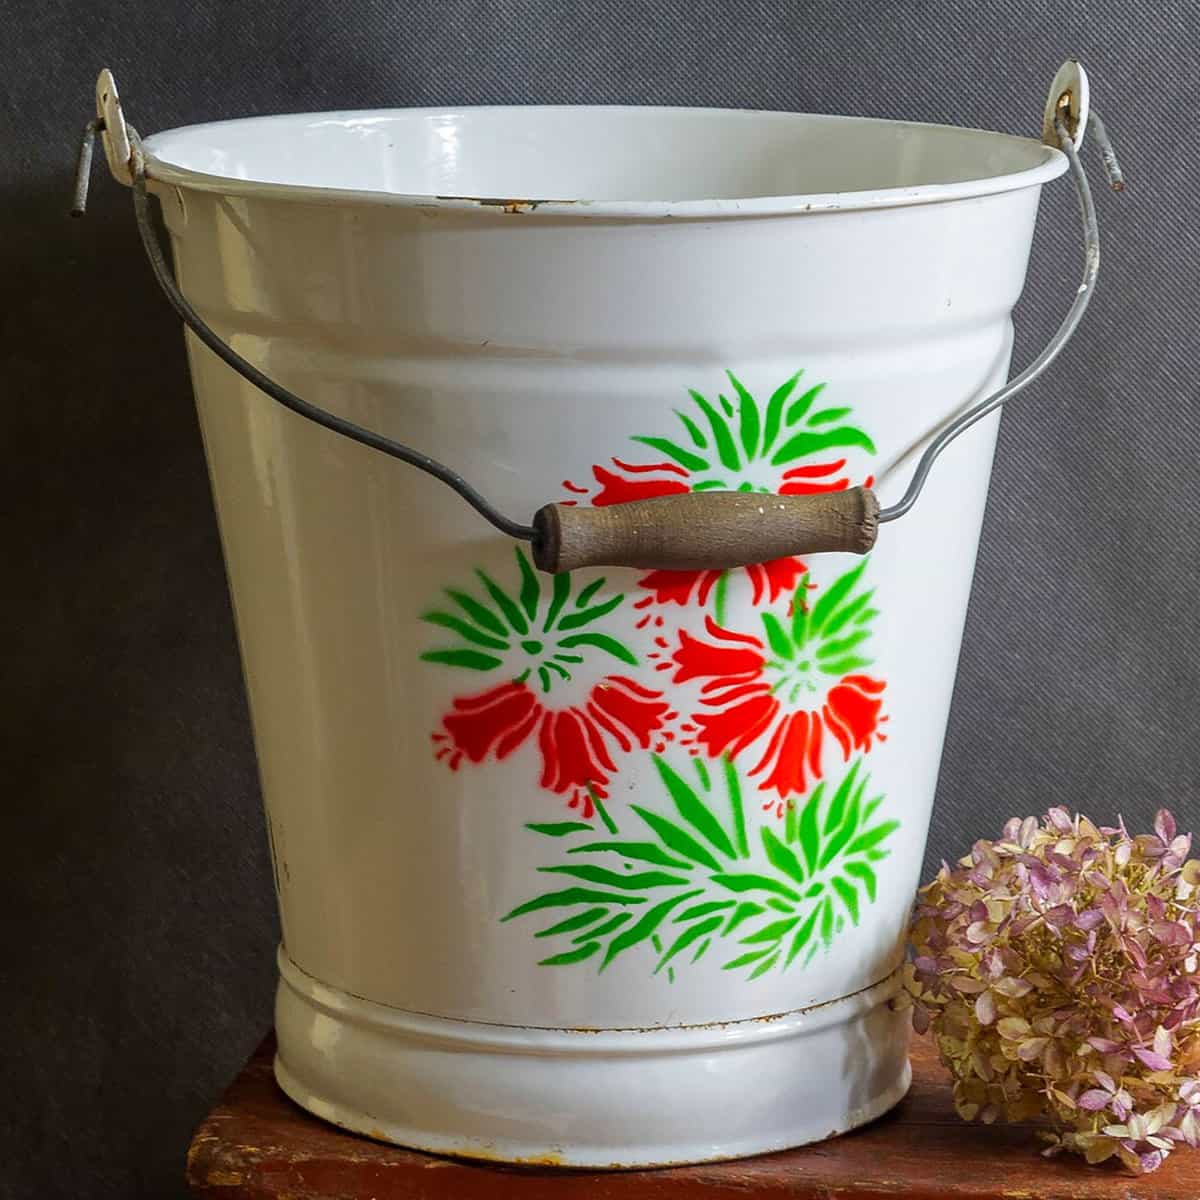 Vintage white enamel pail with red and green flowers painted